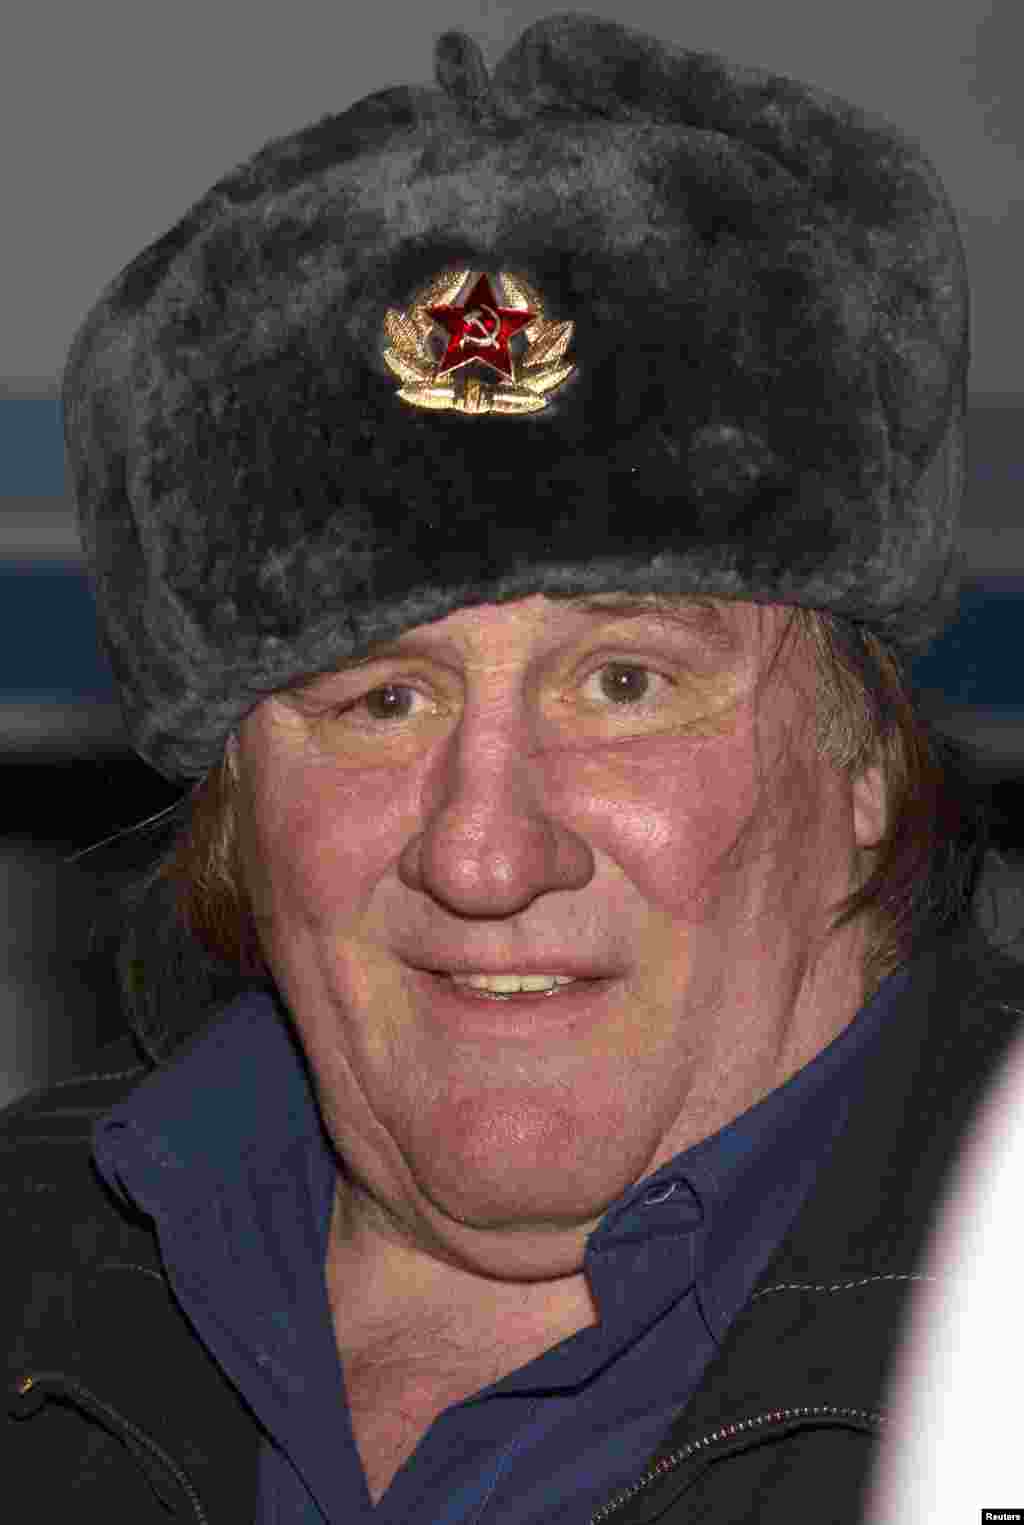 Actor Gerard Depardieu wears a traditional Russian hat, also known as a ushanka, during a welcoming ceremony at the airport in Grozny, Chechnya. The actor says he plans to shoot a movie in the Russian republic. Depardieu was granted a Russian passport by President Vladimir Putin in January after complaining of high tax rates in France. (Reuters/Rasul Yarichev)